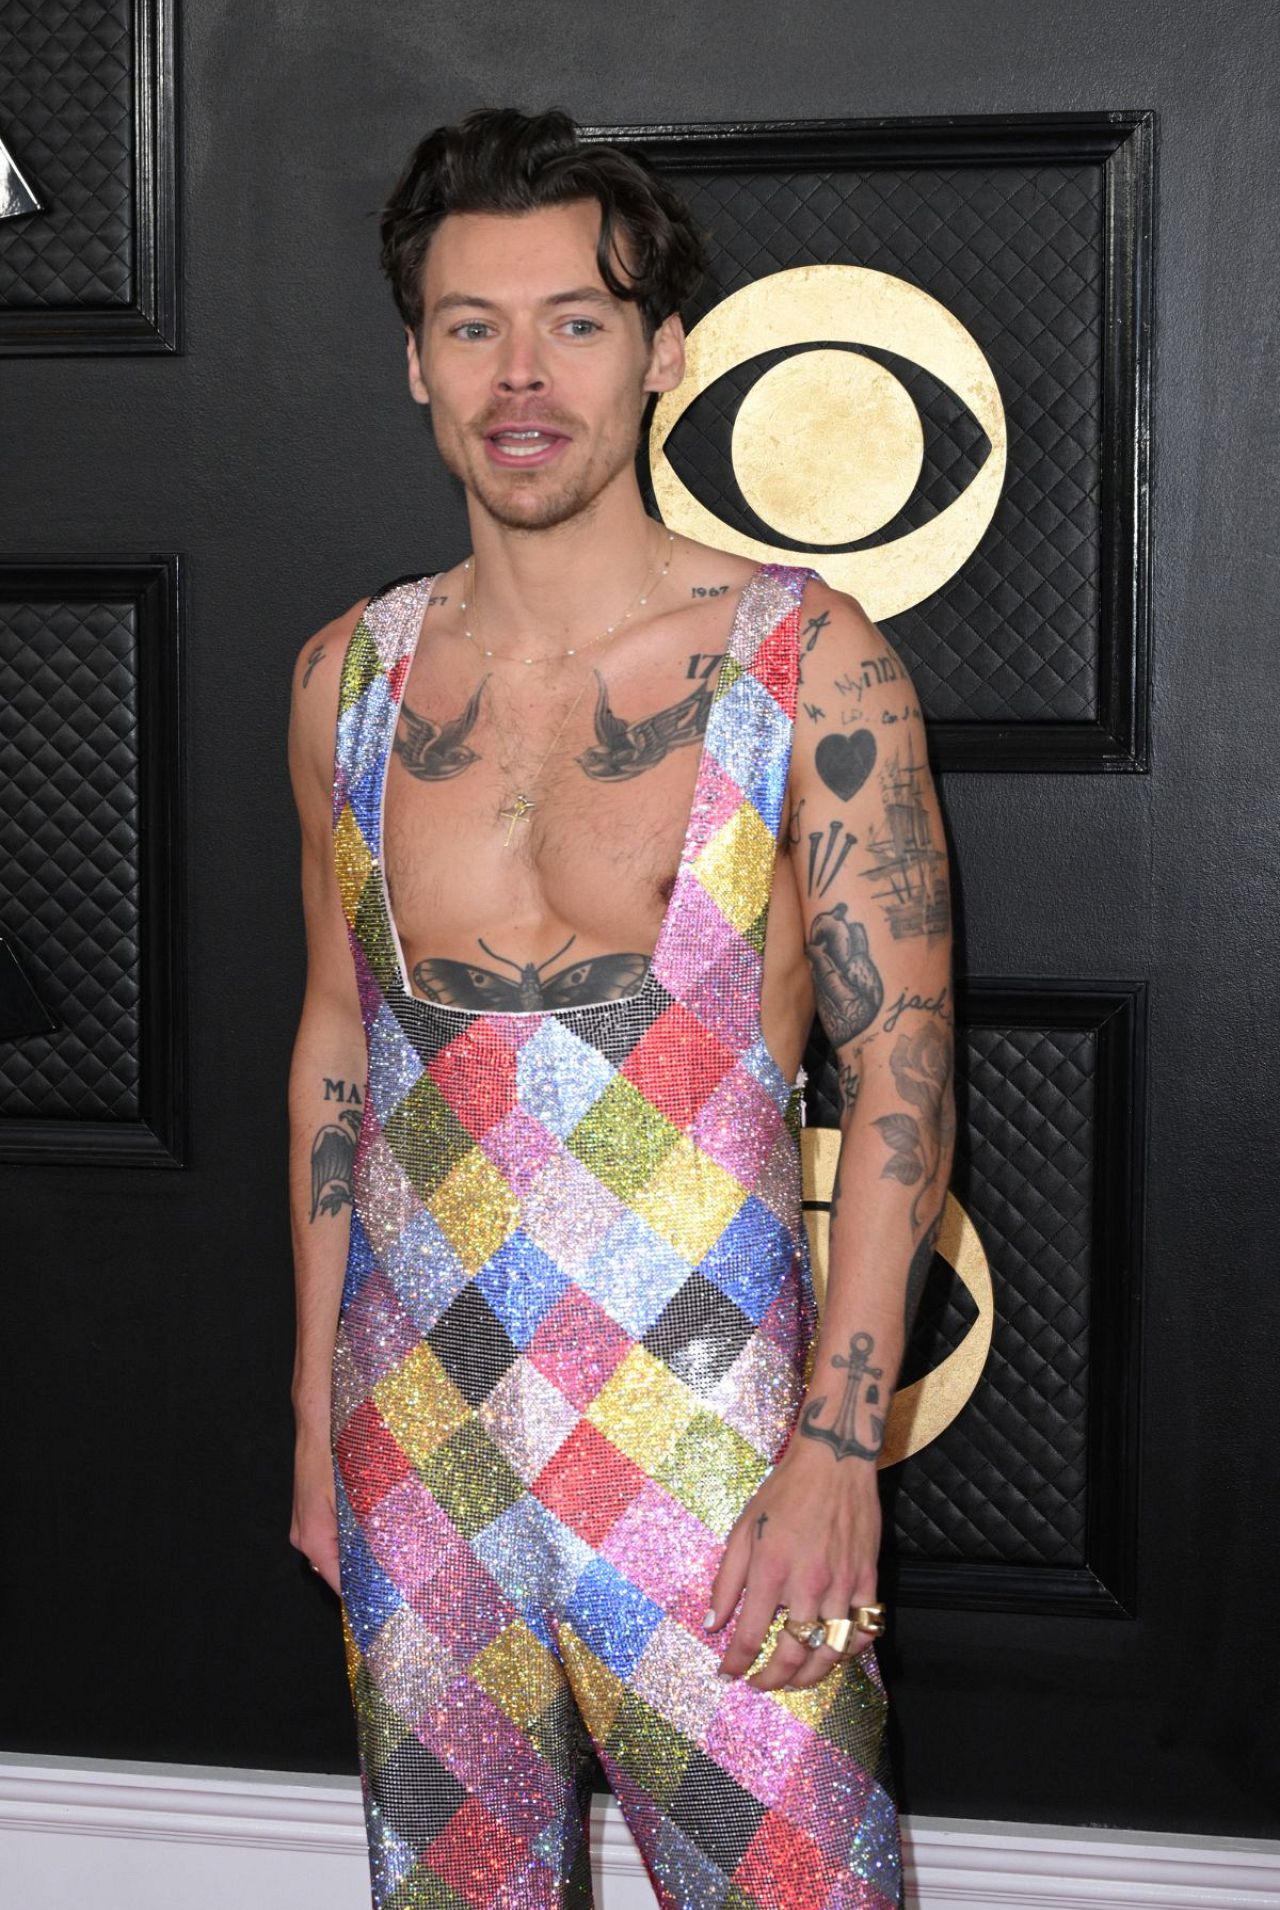 Harry Styles arrives for the 65th Annual Grammy Awards at the Crypto.com Arena in Los Angeles on February 5, 2023.